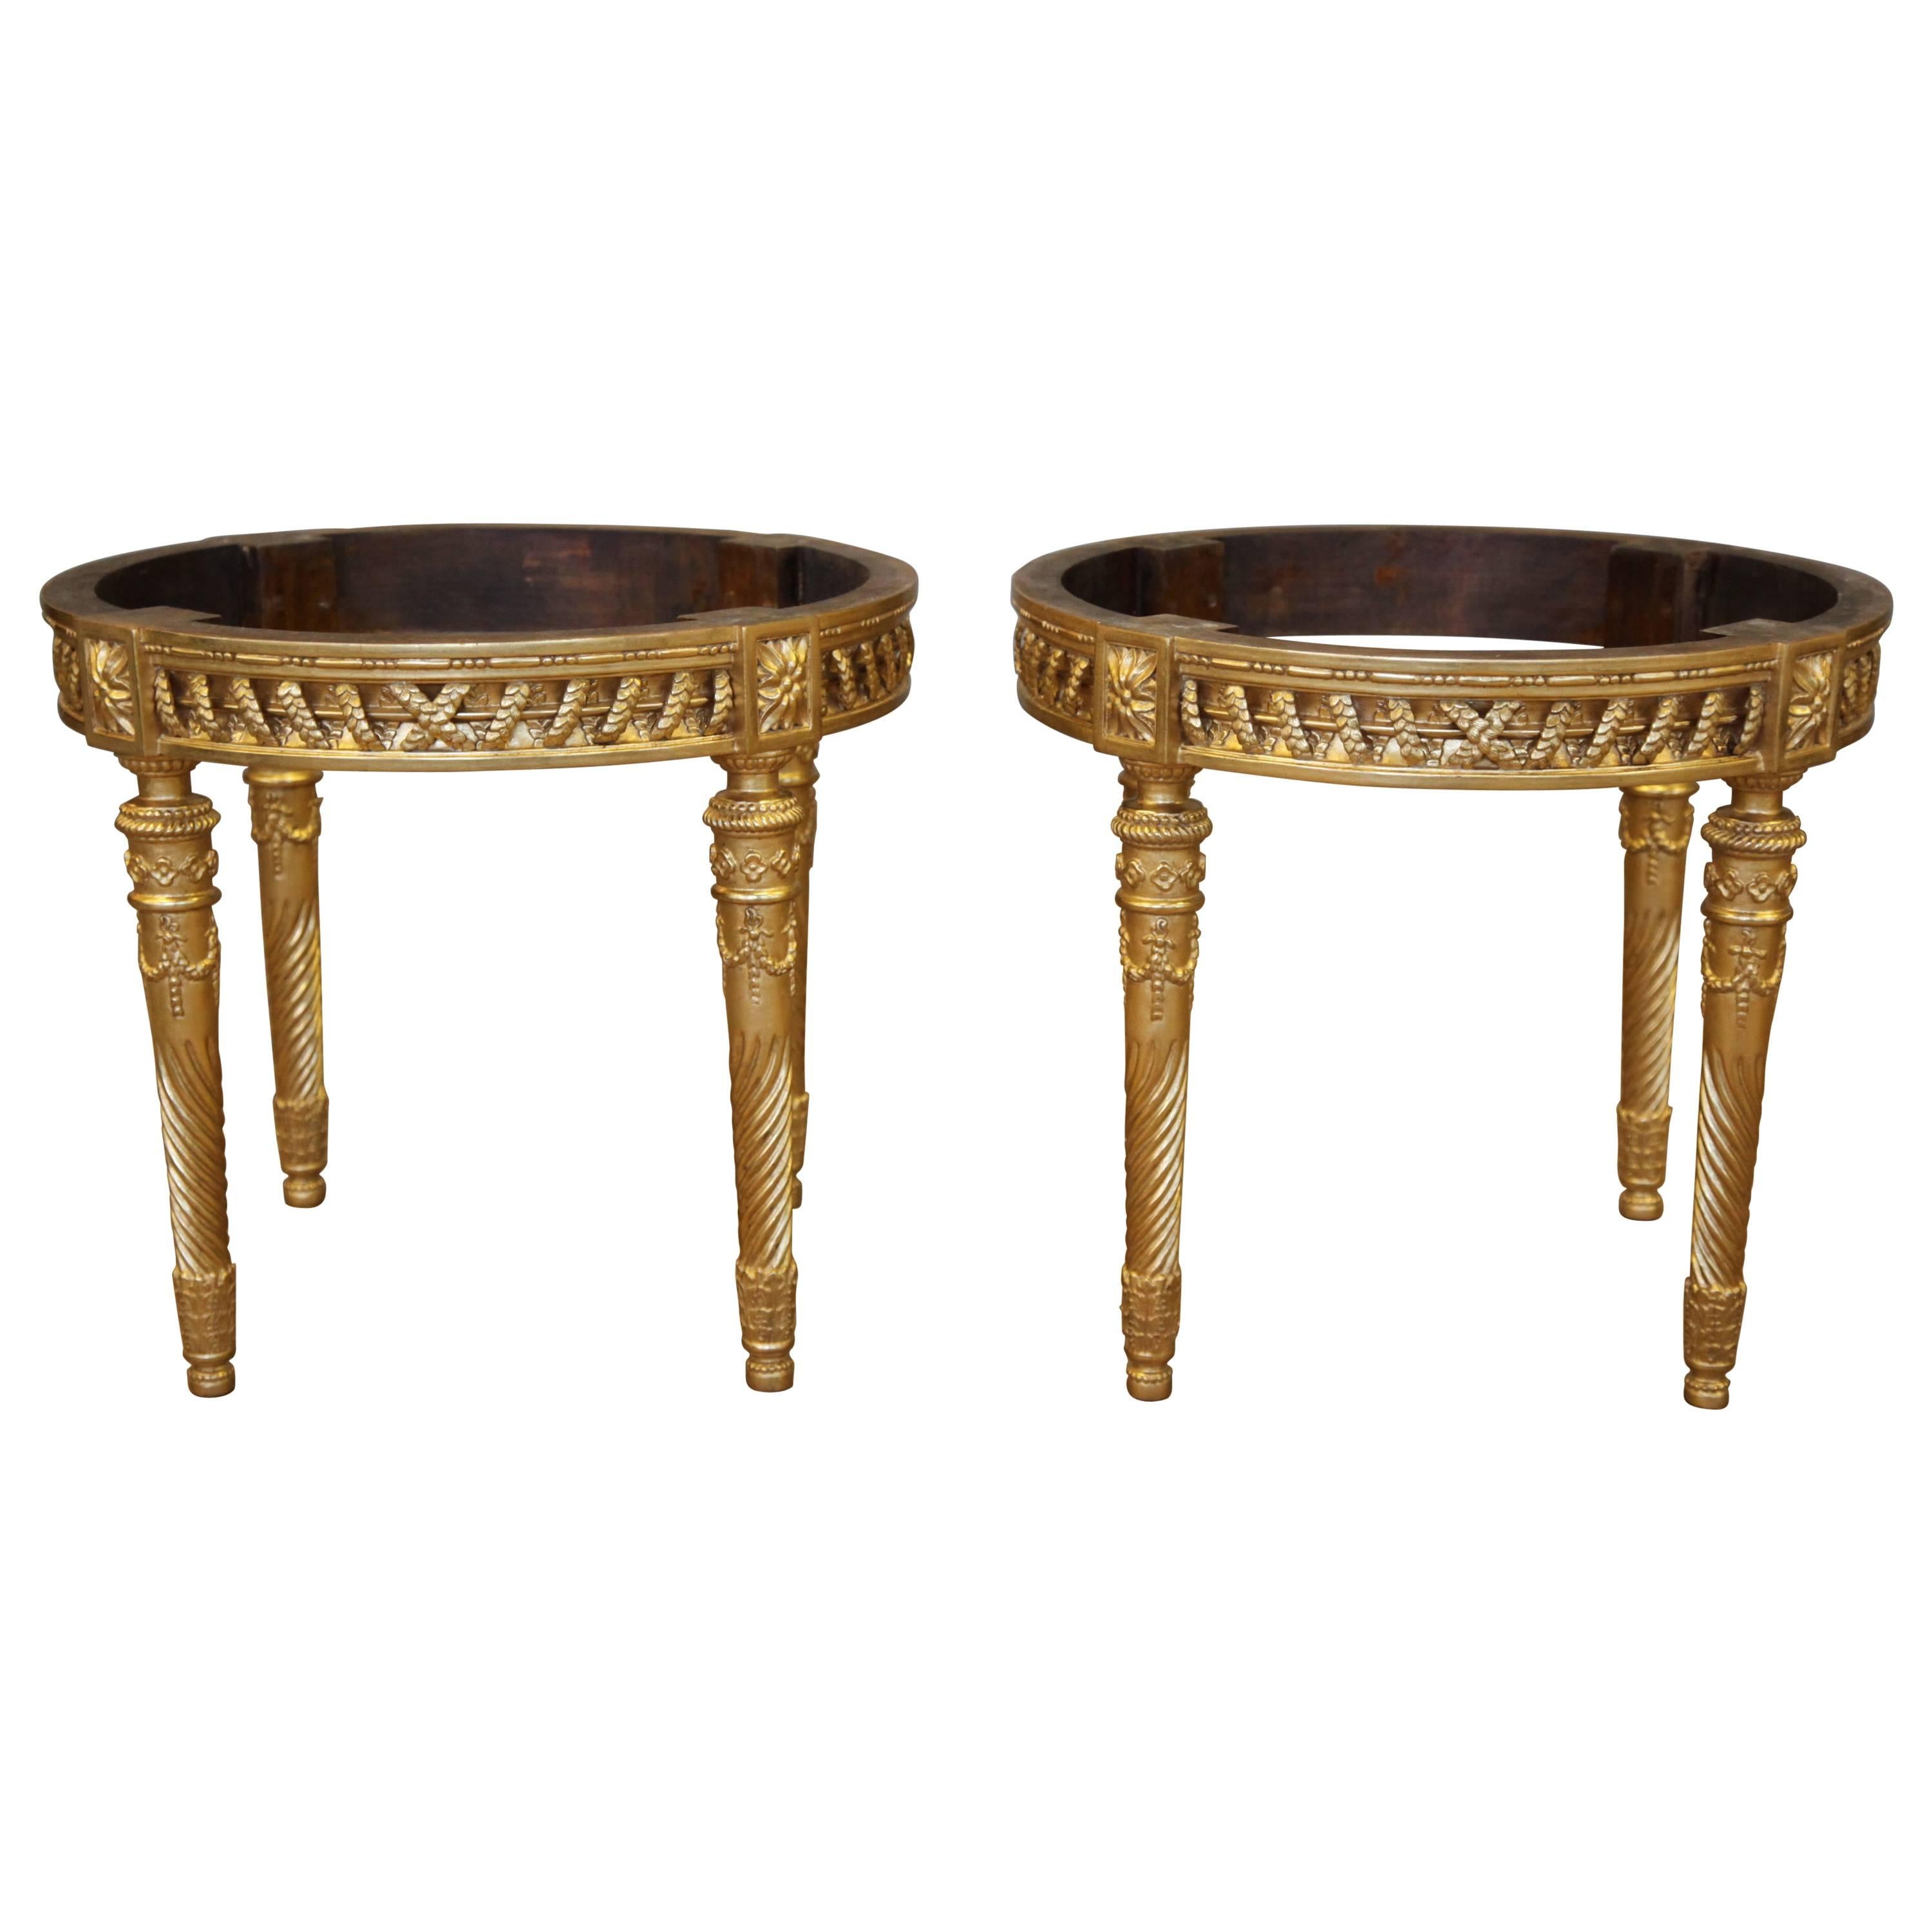 Pair of Louis XVI Style Giltwood Round End Tables